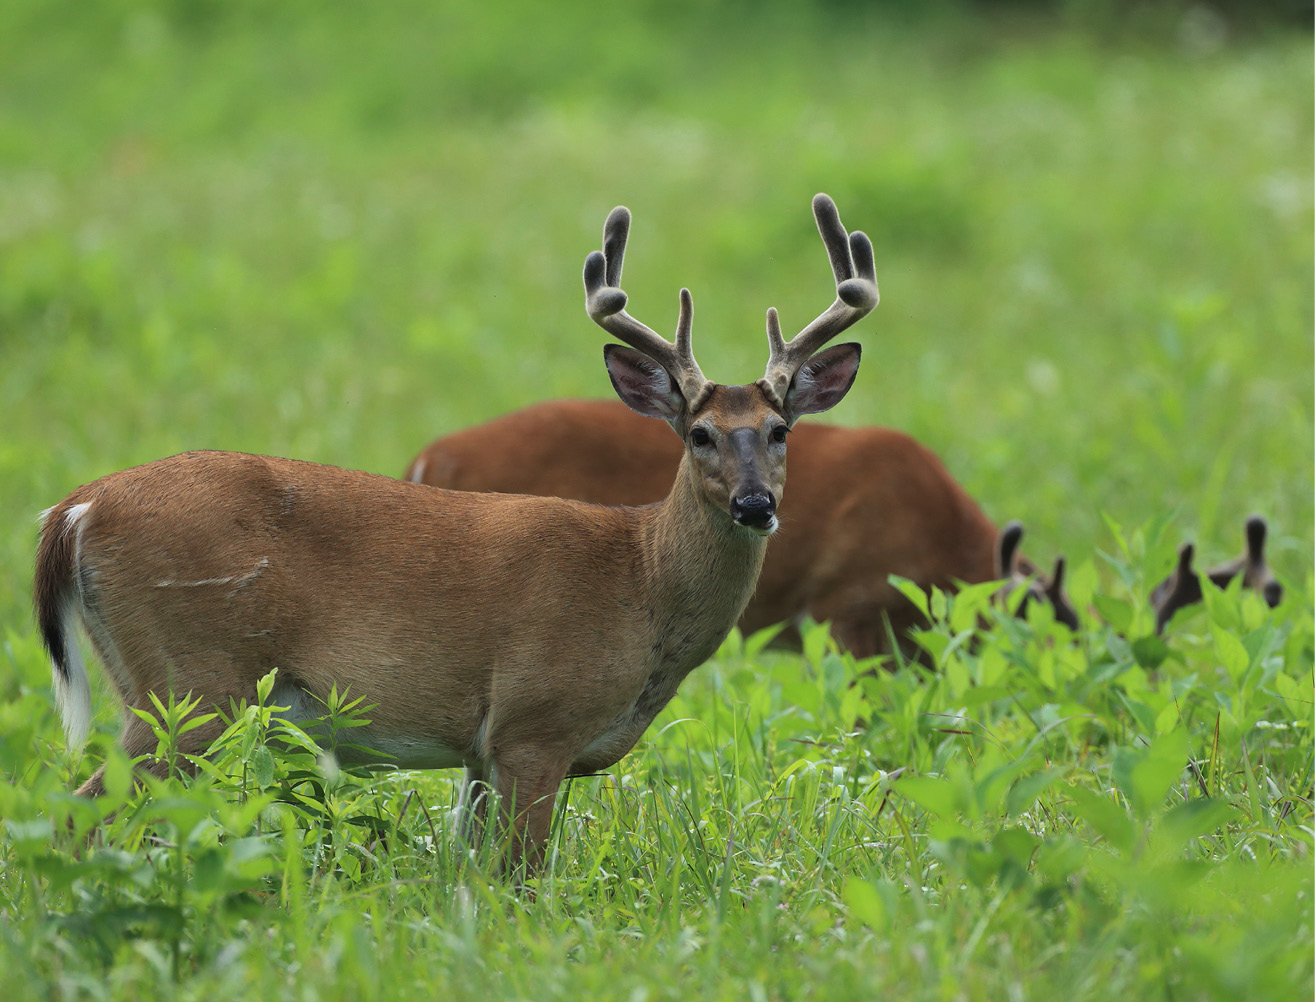 Two deer with antlers in a grassy field.